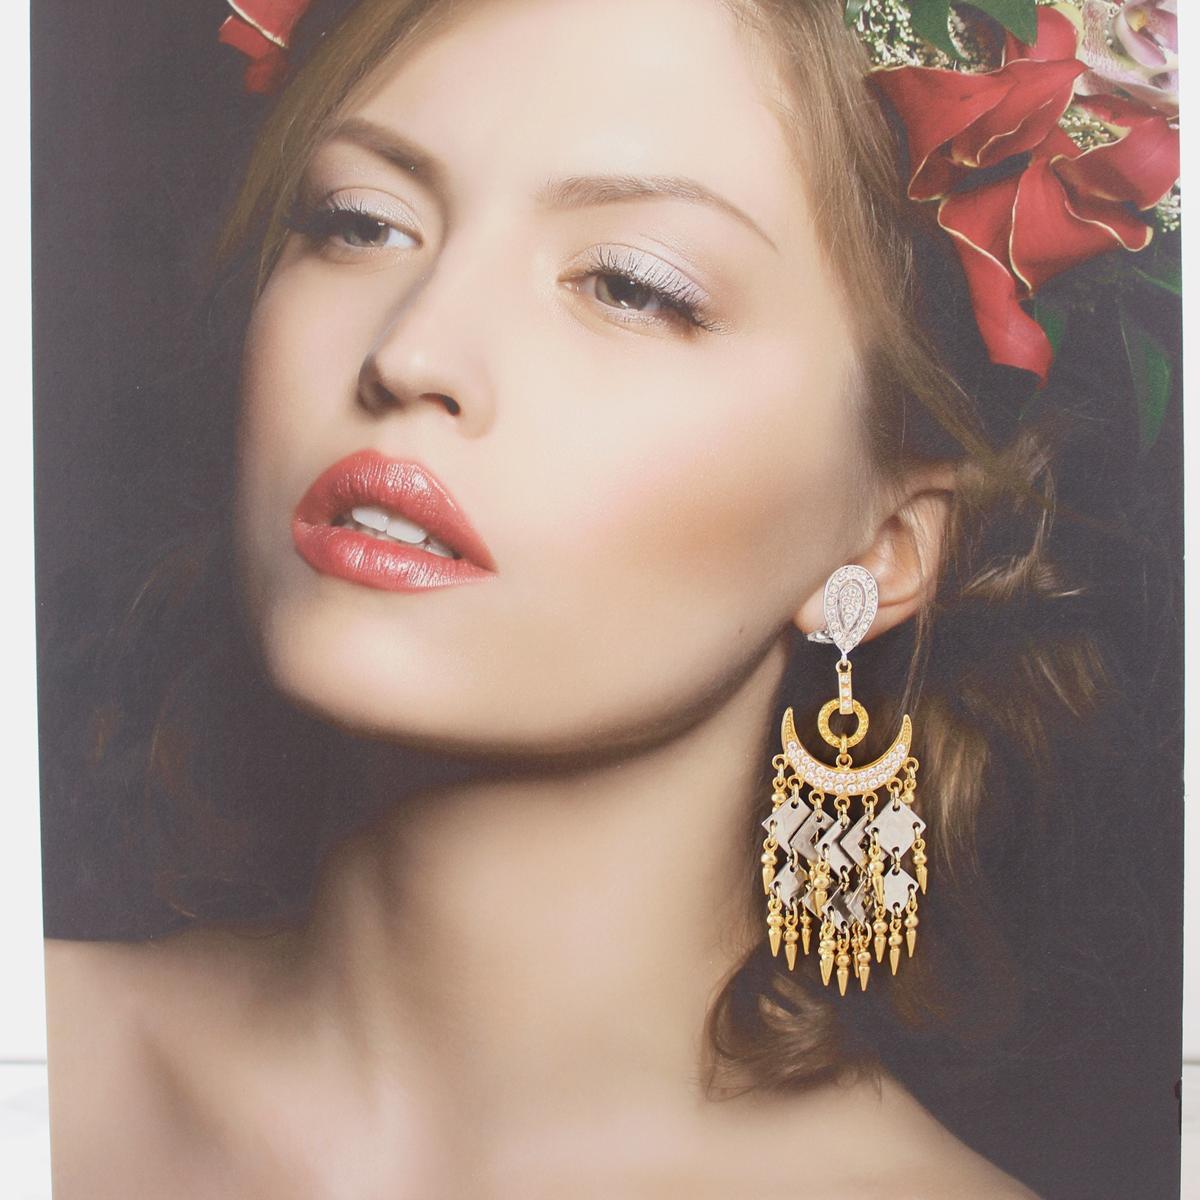 Chic and cool Carlo Zini bijoux earrings
One of the world's best bijoux designers
Gold gipsy collection
Non allergenic rhodium, gold dipeed in some parts
Golden half-moon and tips
Swarovski crystals
Clip on closure, pierced on request
100% Artisanal